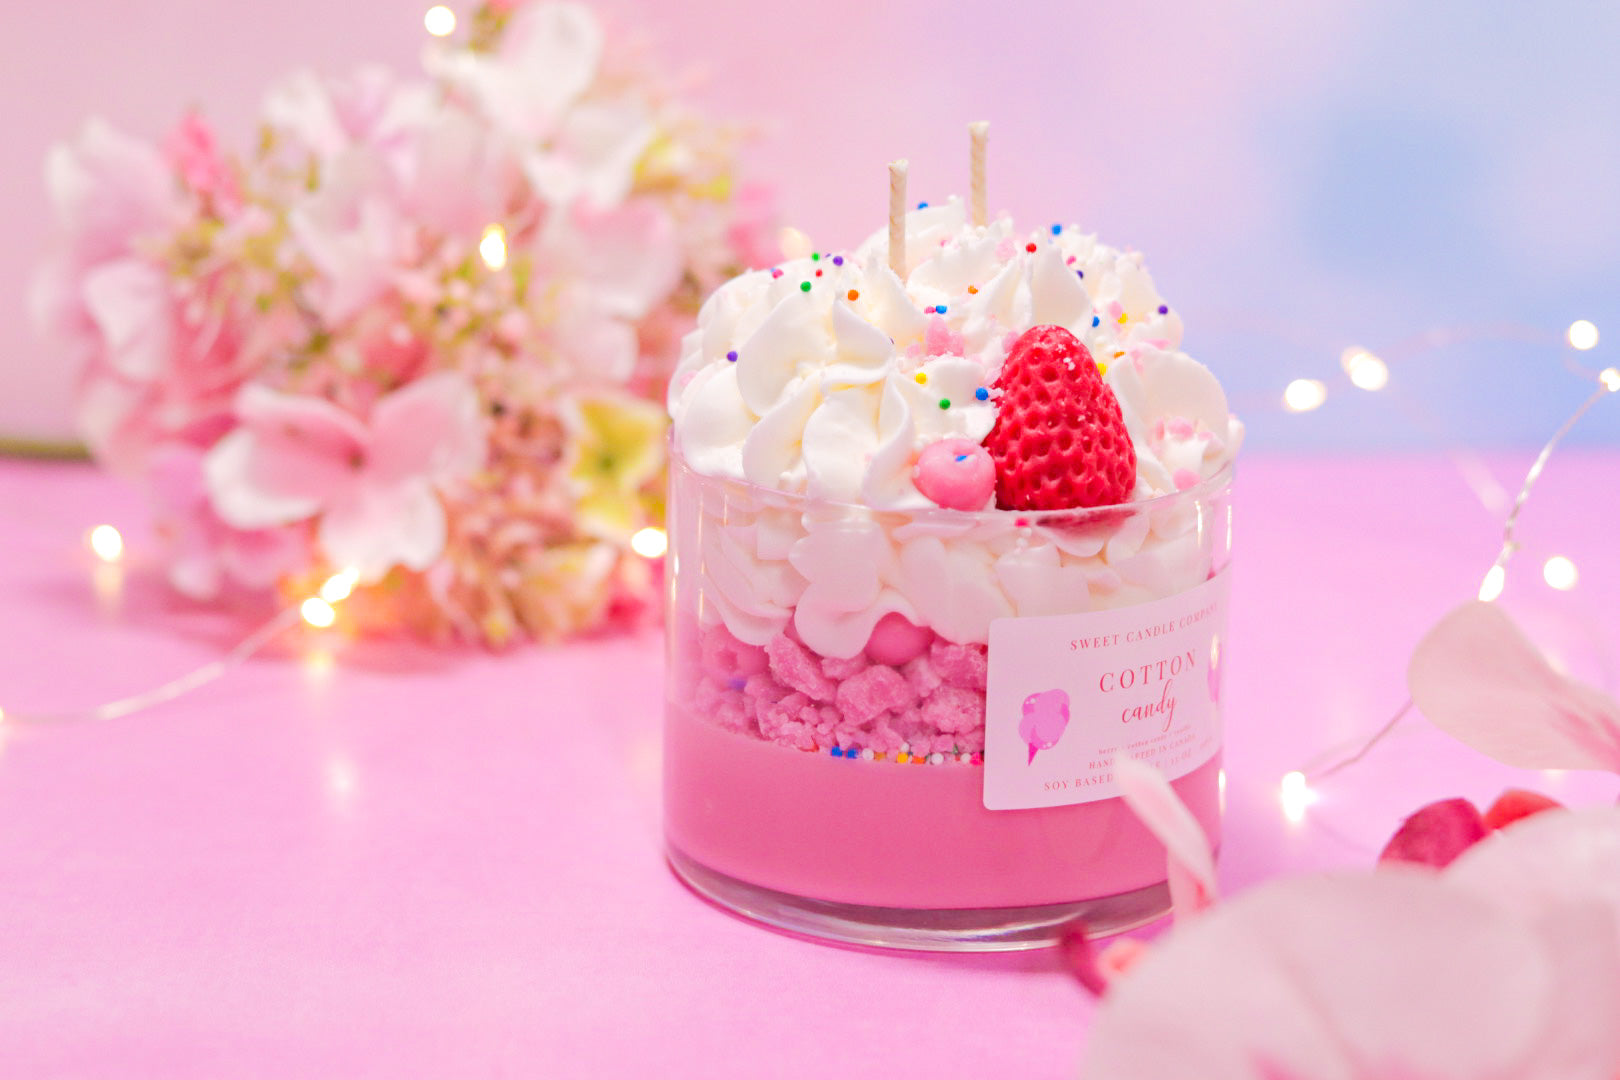 Indulge in the Sweet Delight of Cotton Candy with Our Large 3-Wick